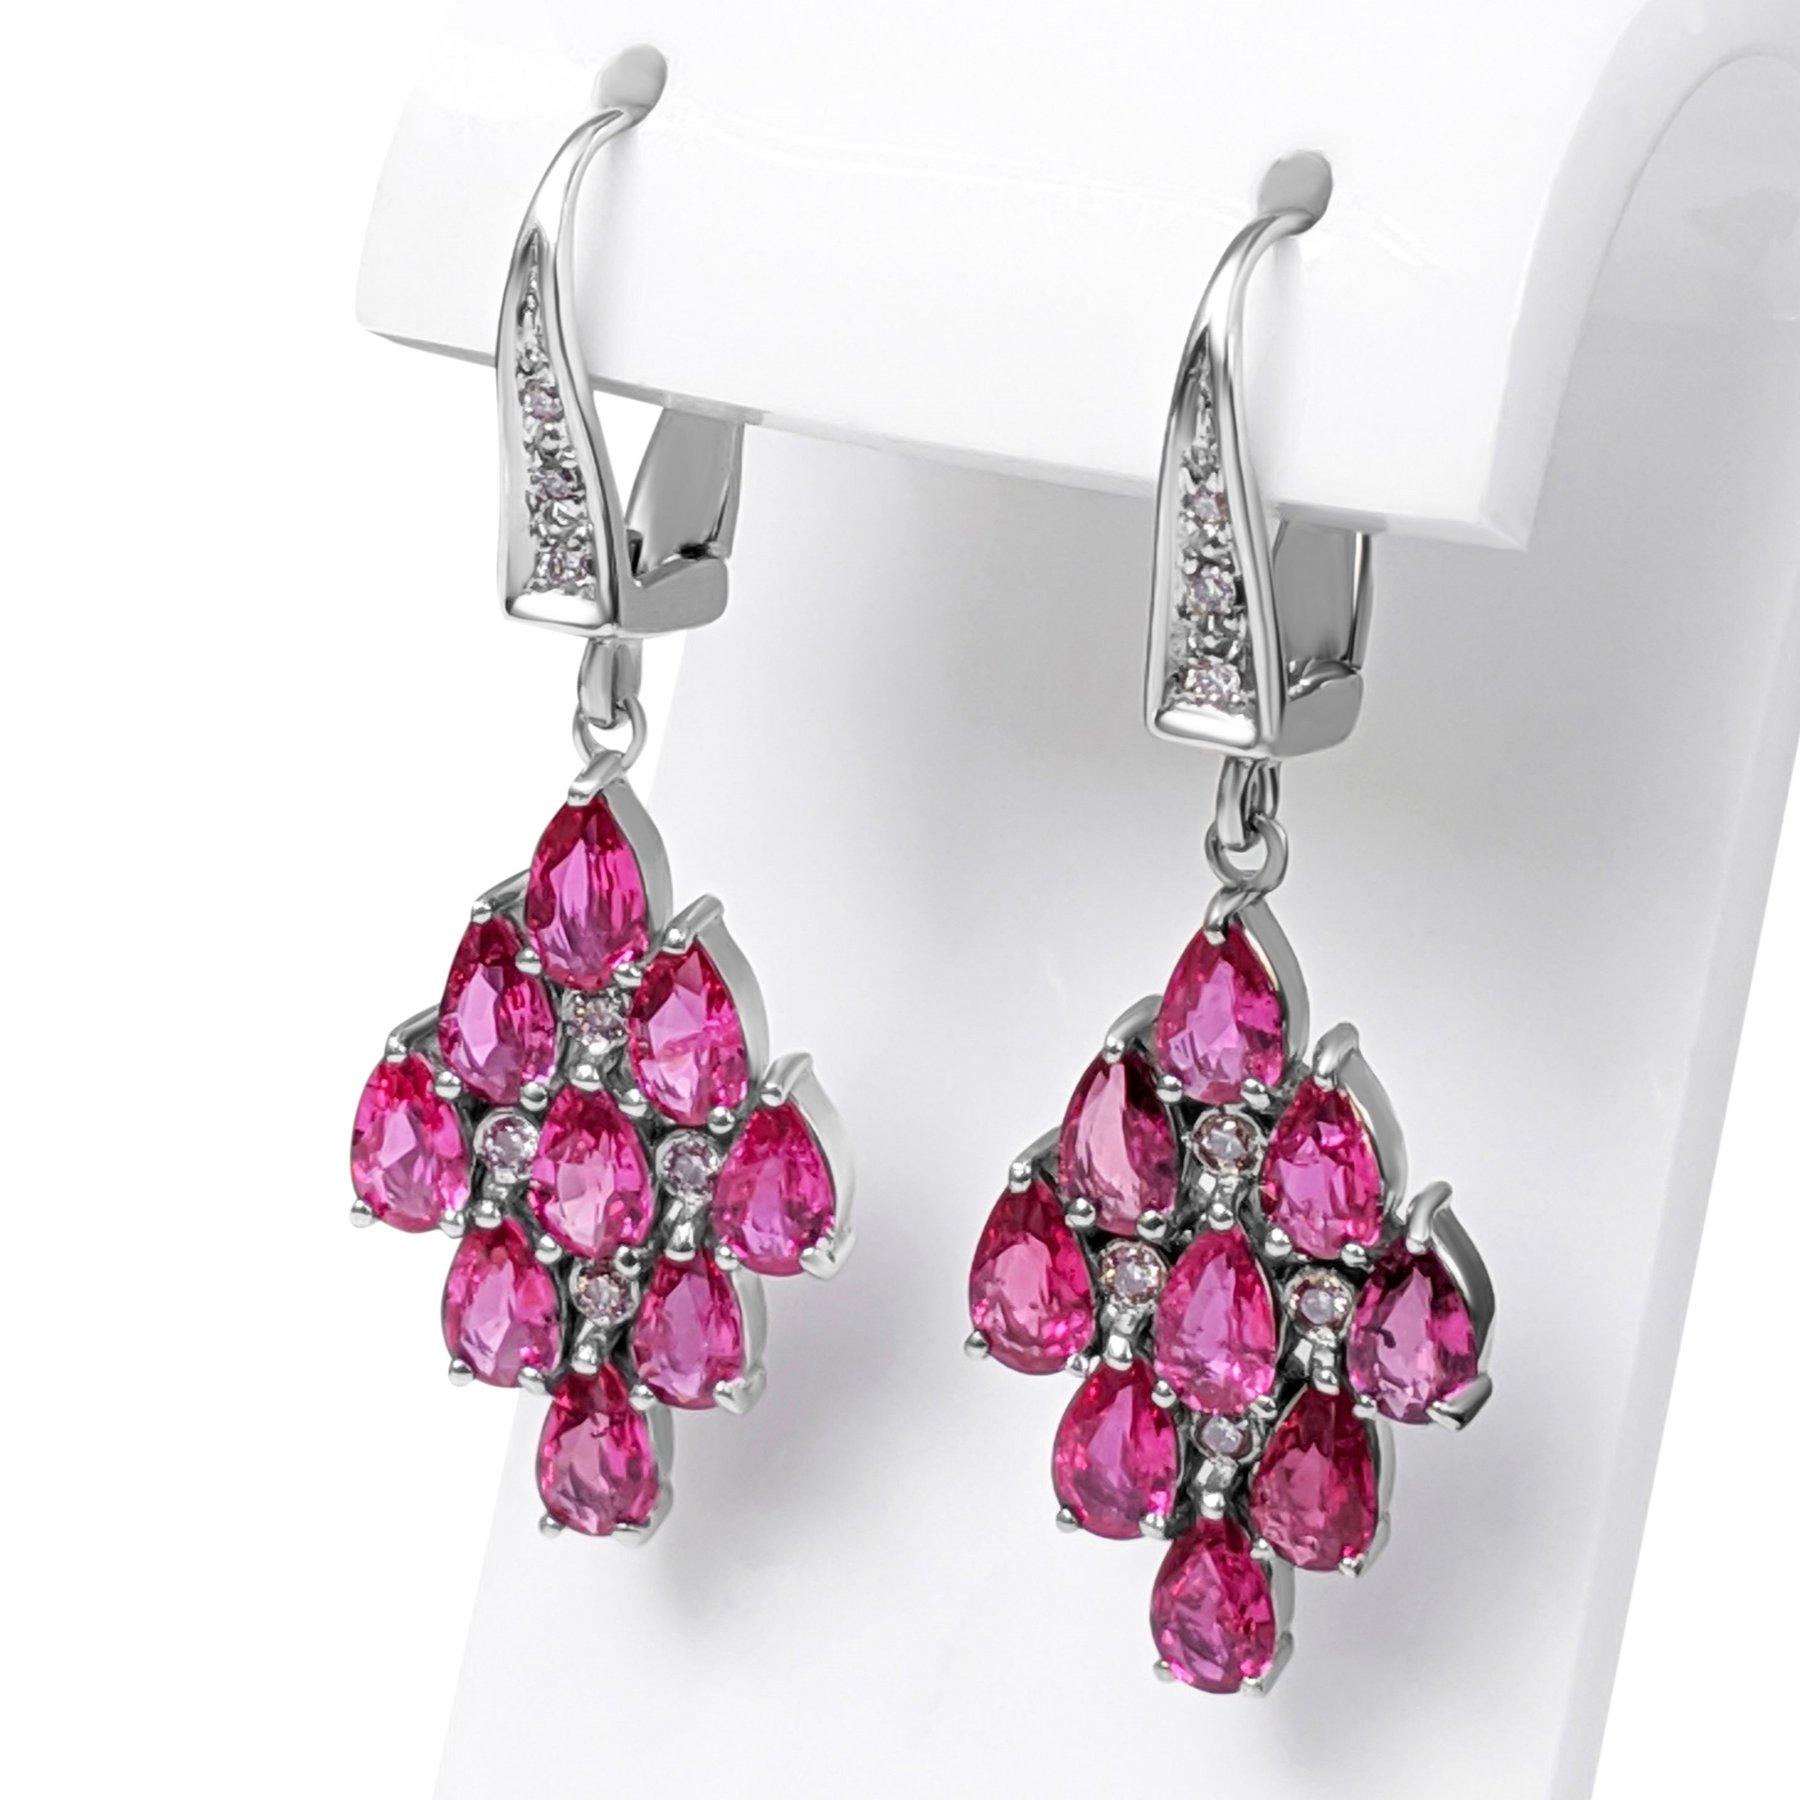 Pear Cut $1 NO RESERVE! 3.57Ct NO HEAT Ruby & 0.15Ct Fancy Pink 14kt White Gold Earrings